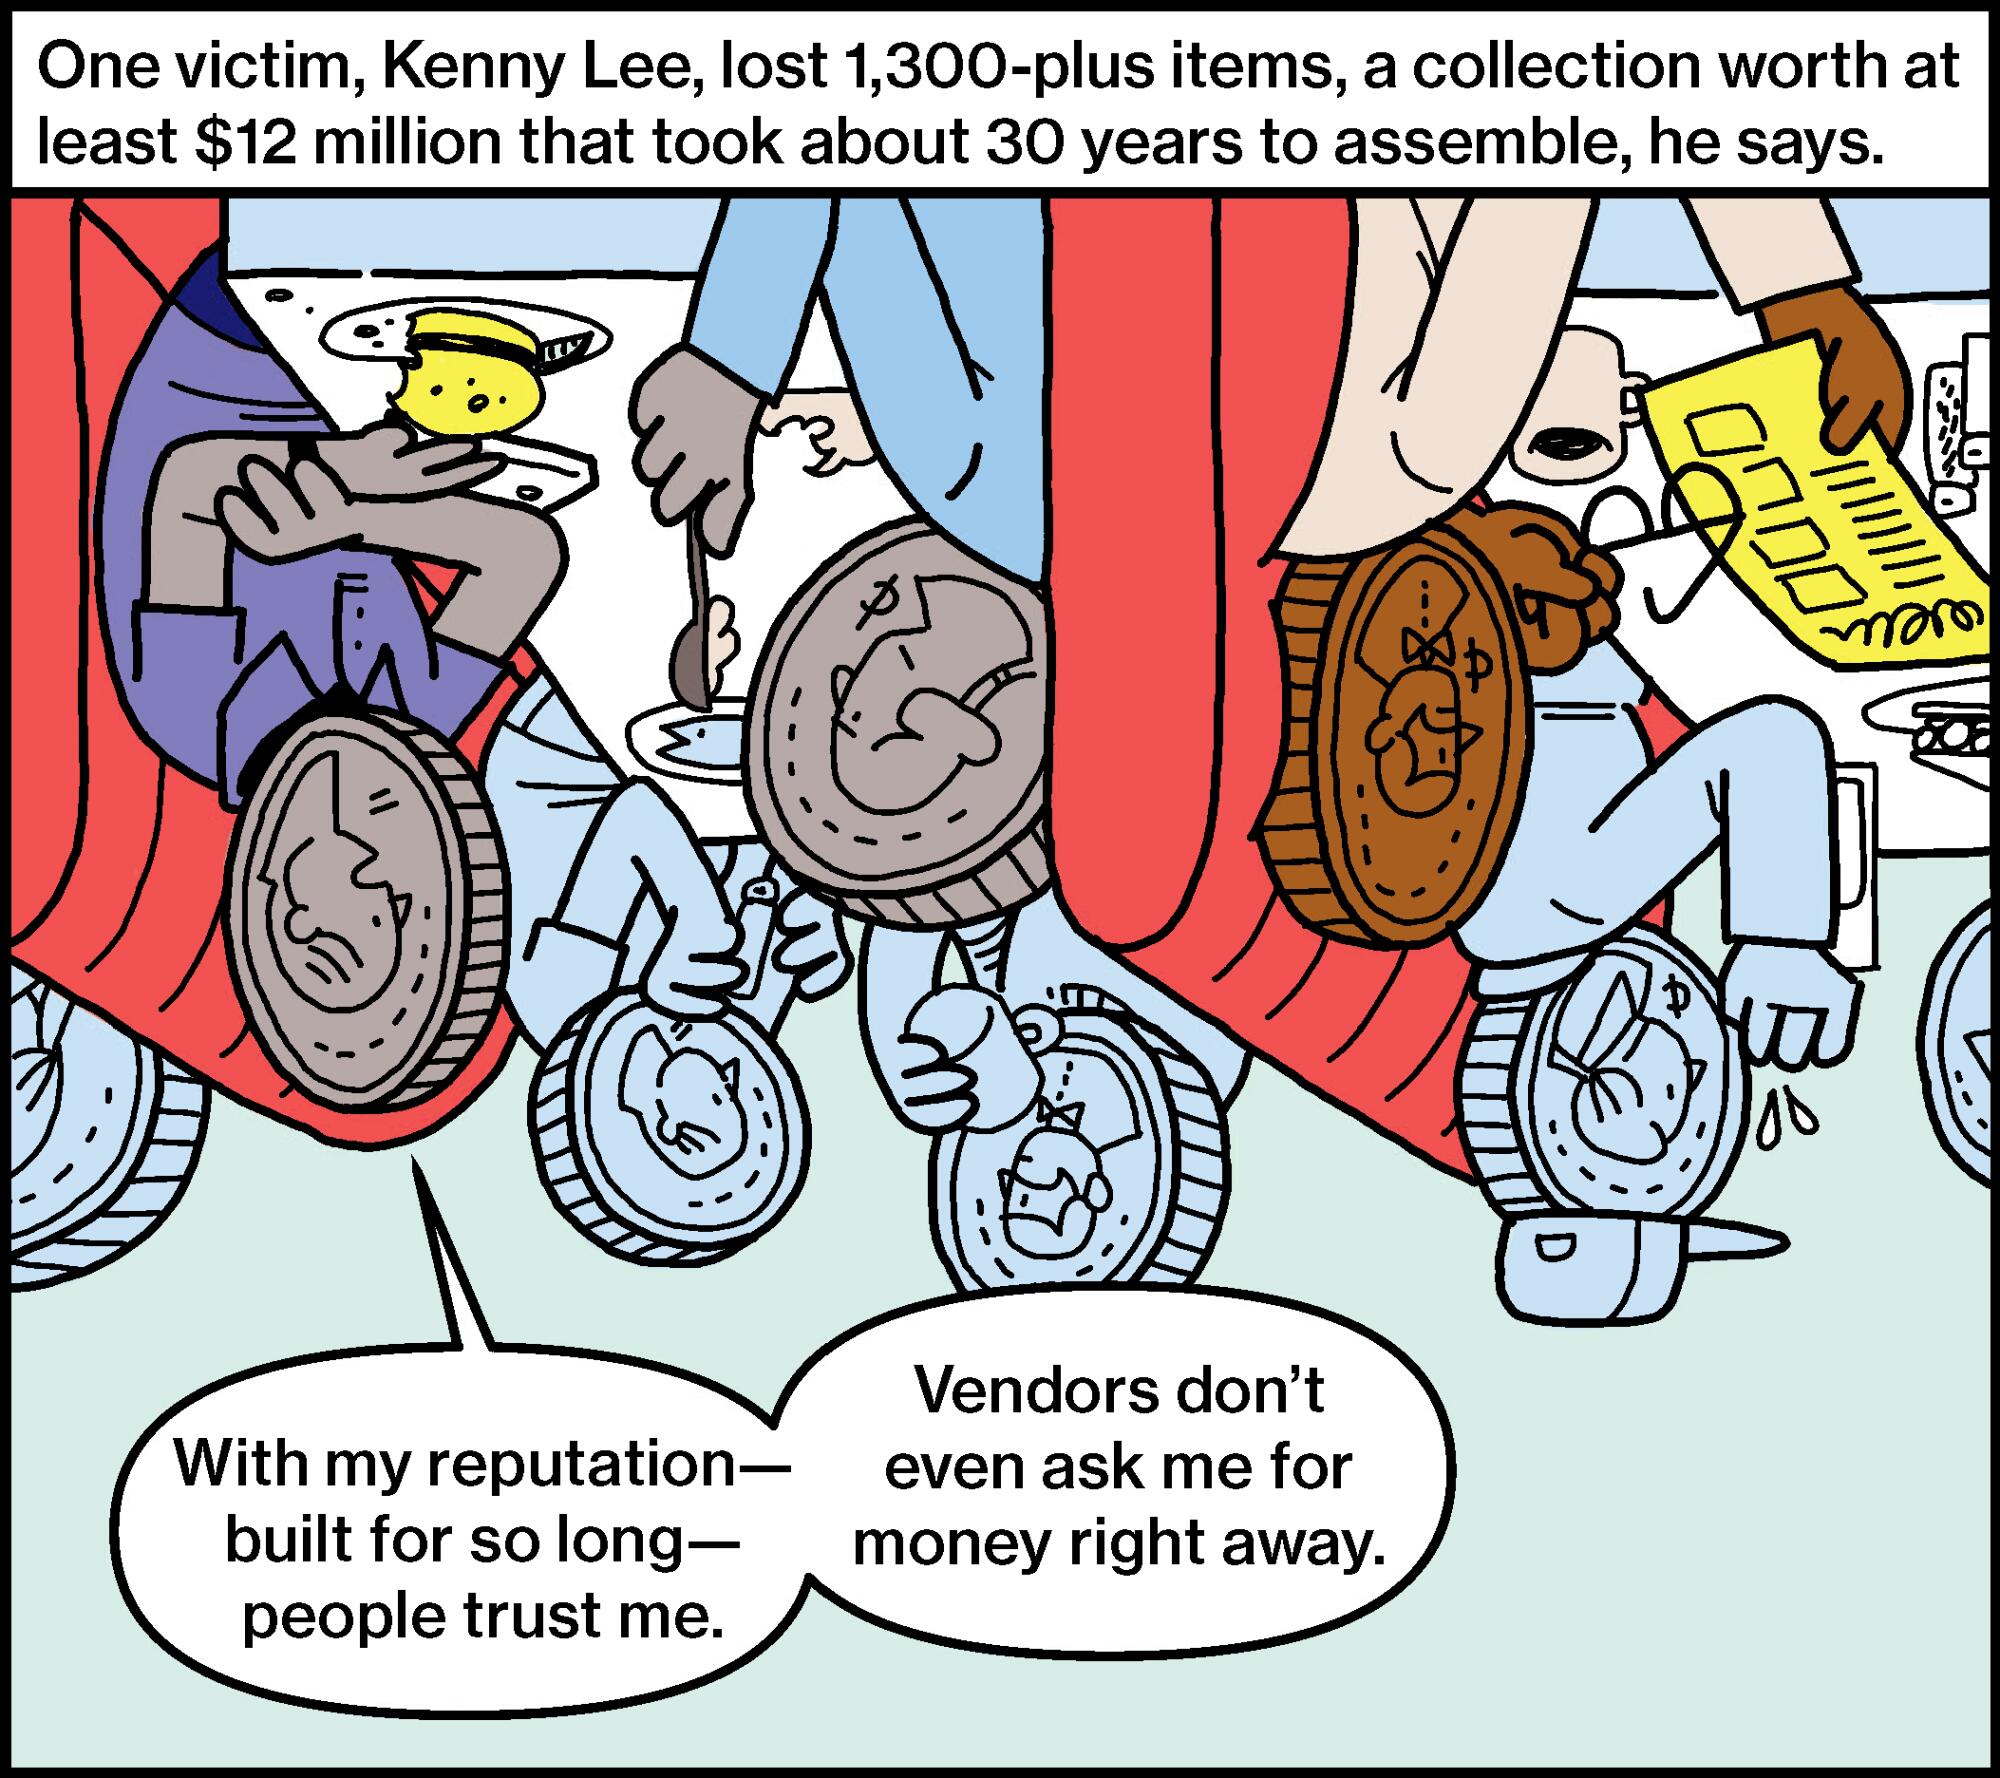 One victim, Kenny Lee, lost 1,300-plus items, a collection worth at least $12 million that took 30 years to assemble he said.